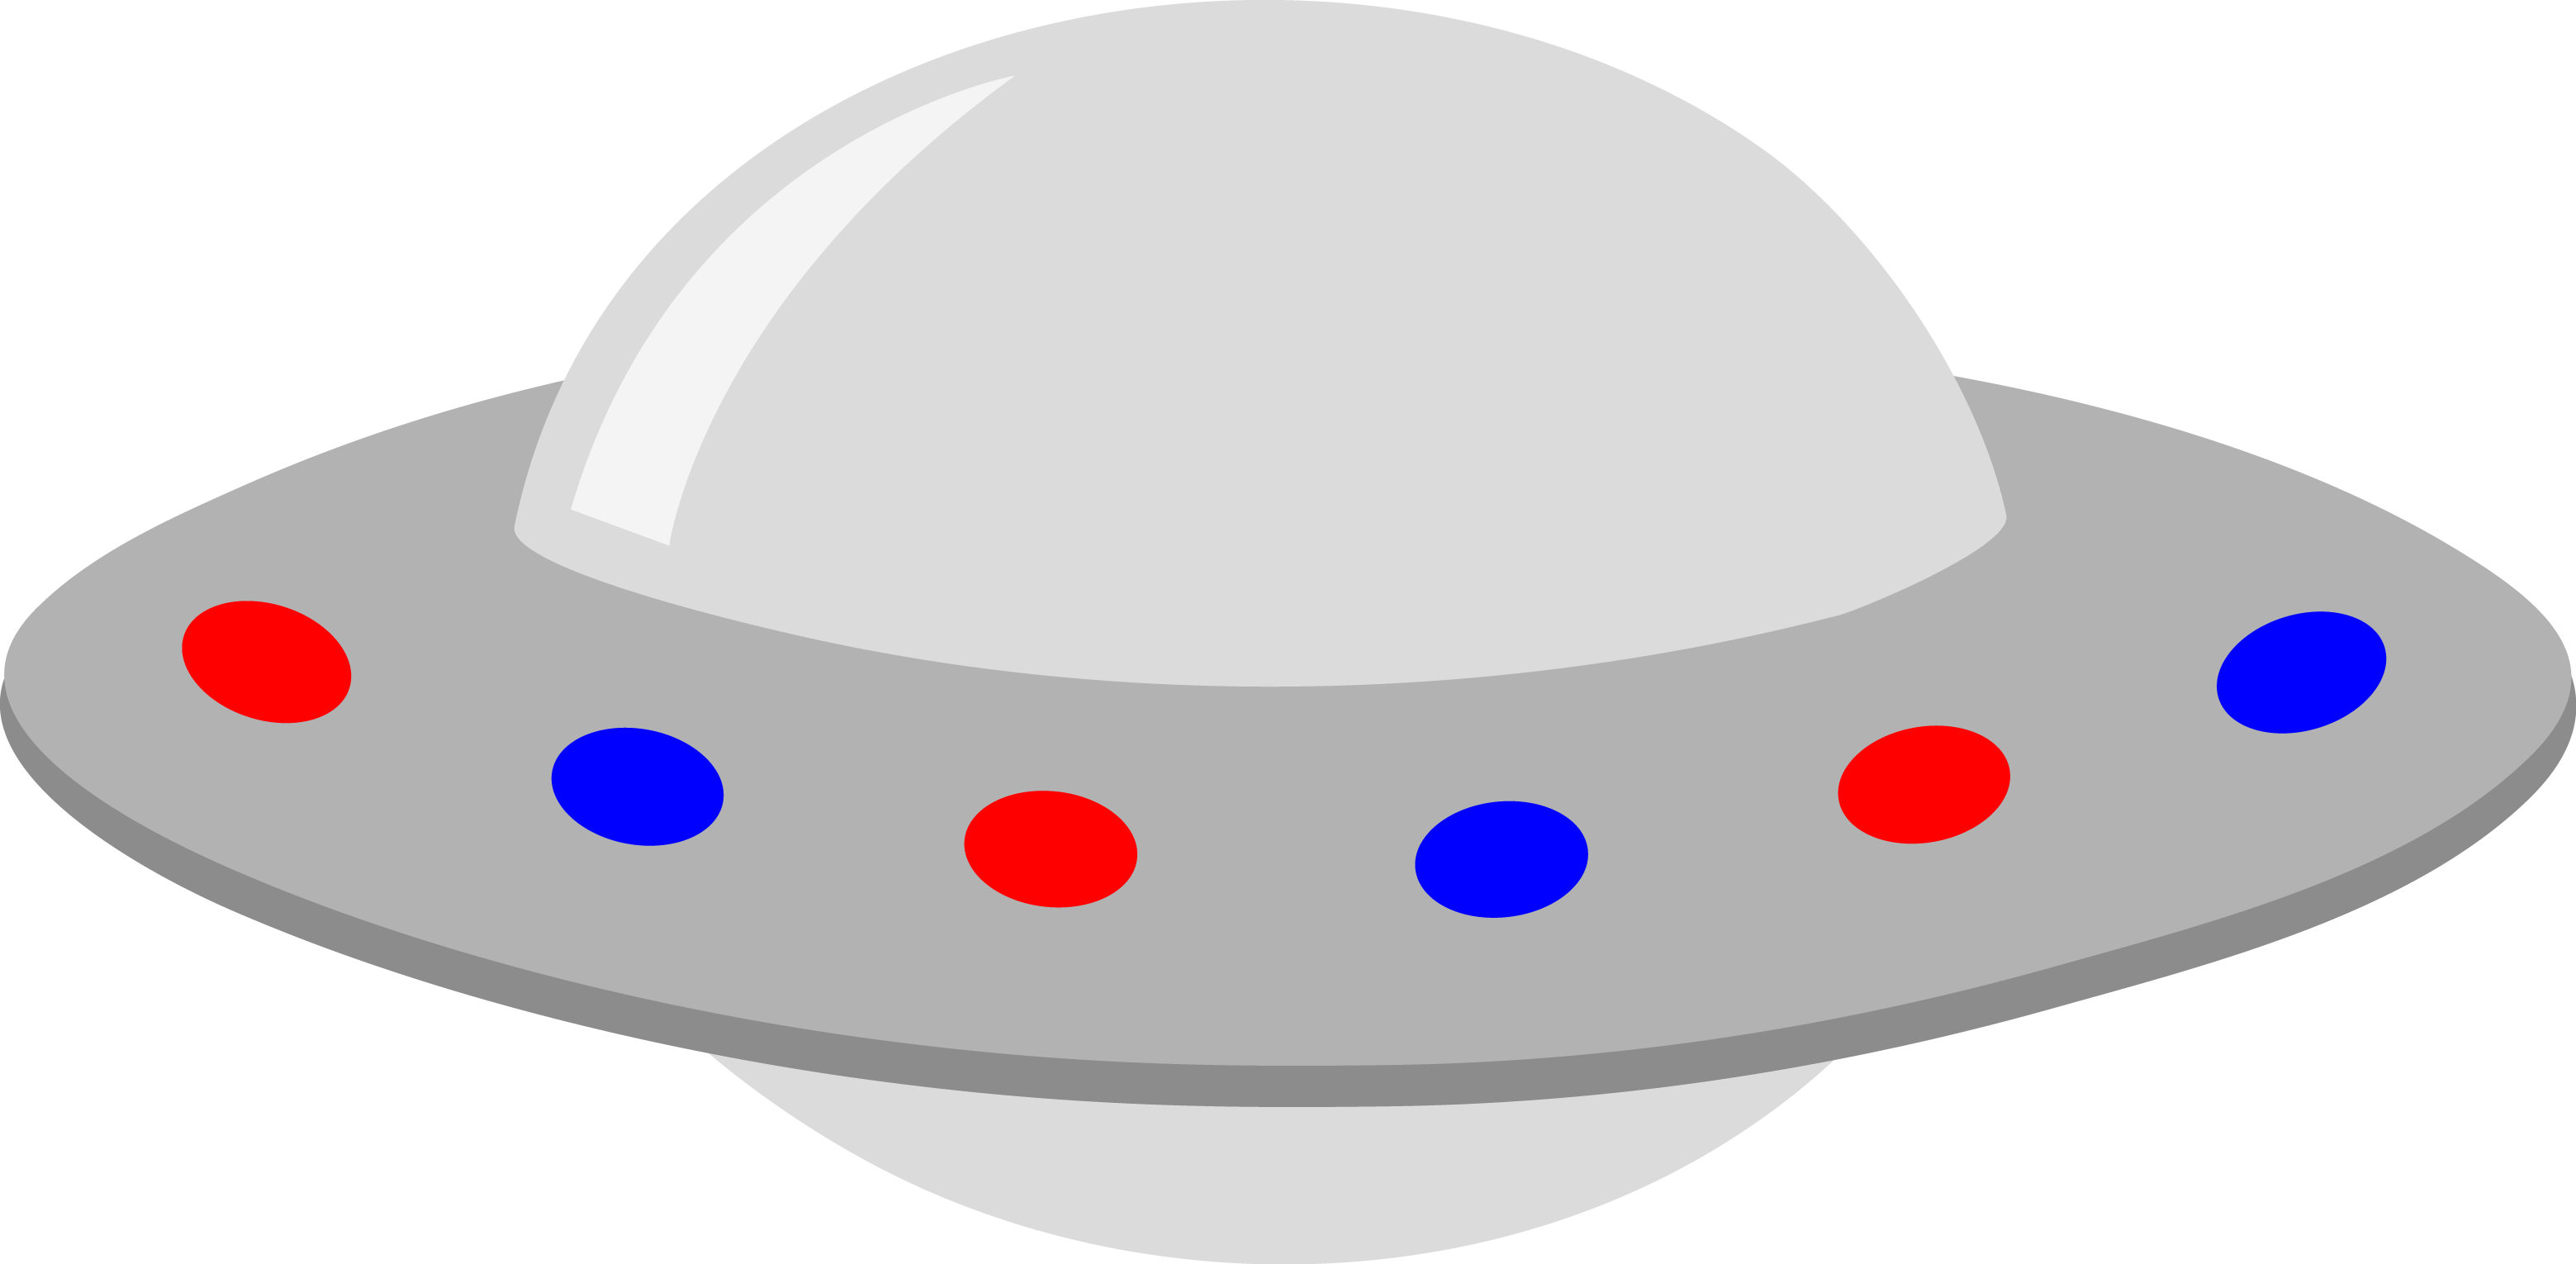 Silver with red and. Ufo clipart alein